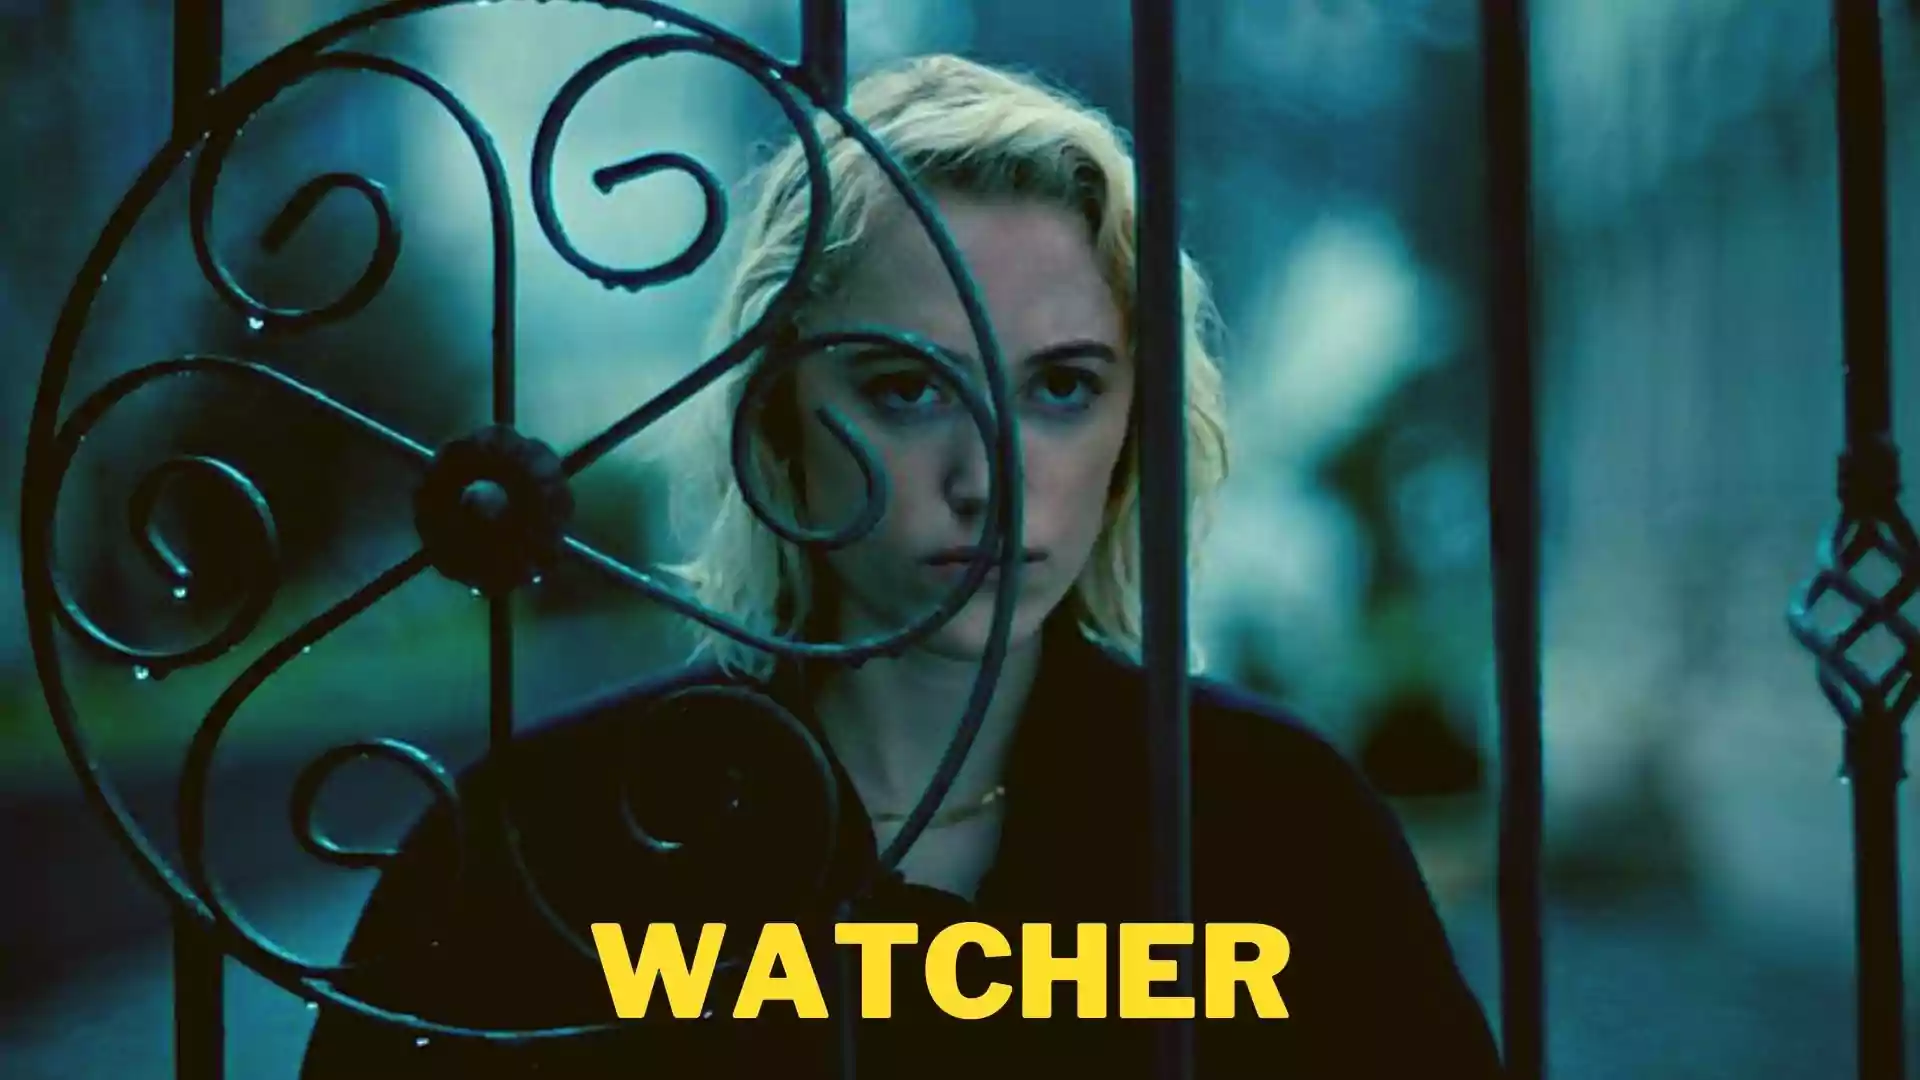 Watcher Wallpaper and Image